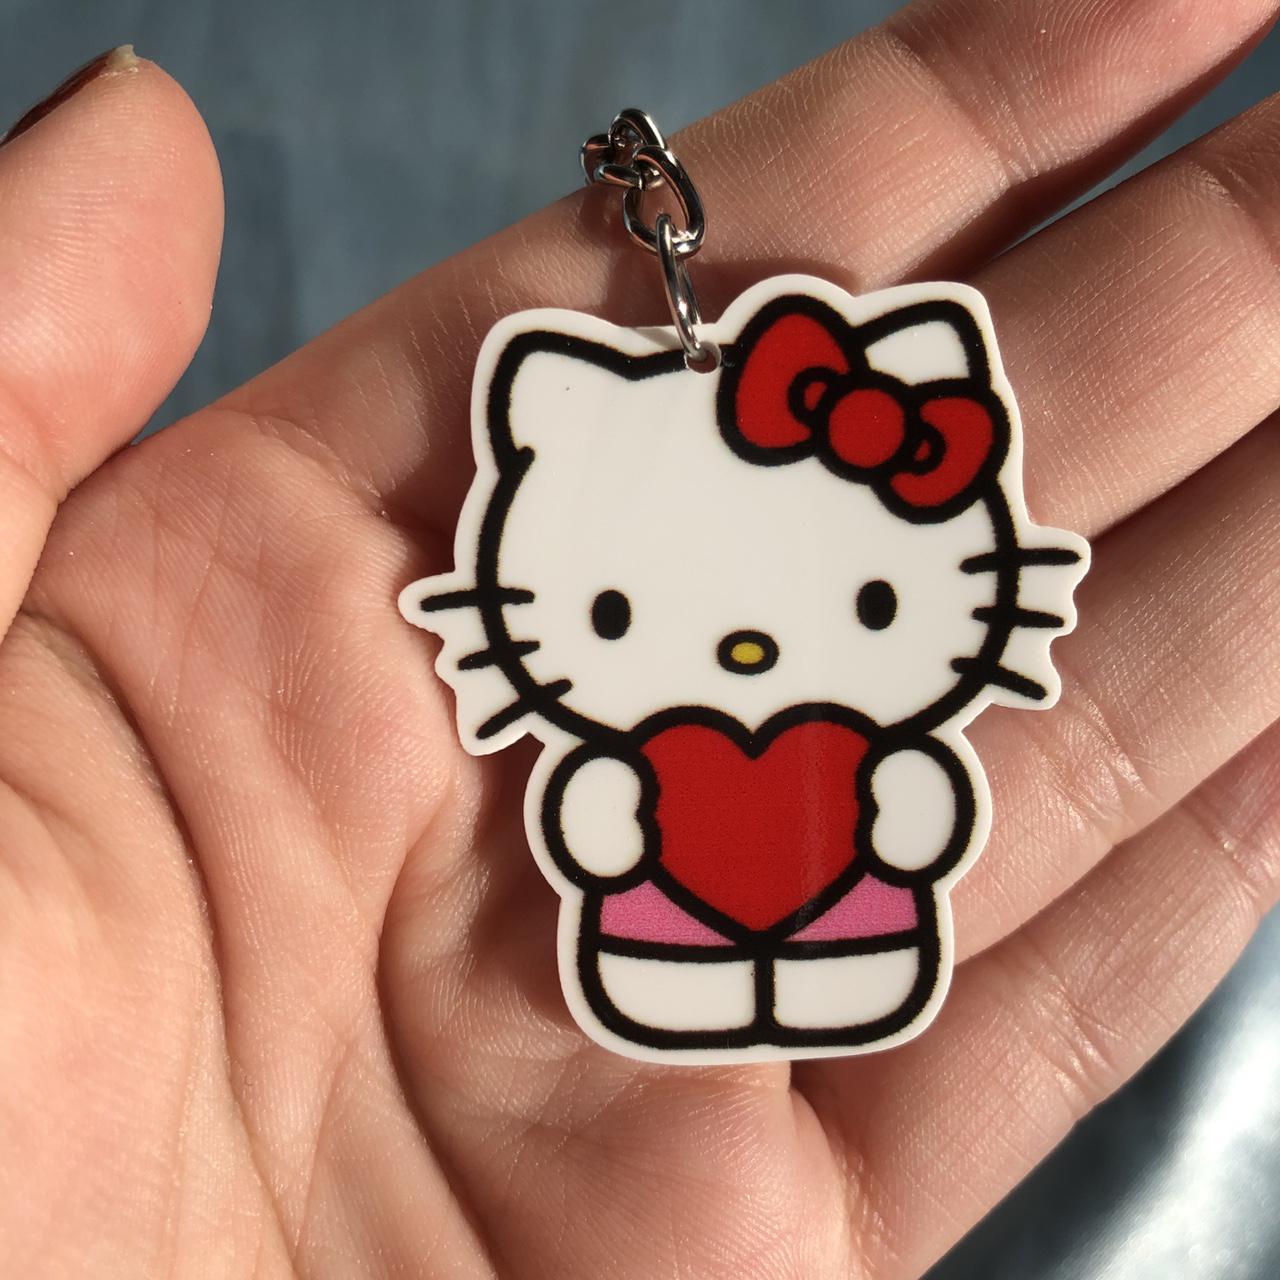 Product Image 2 - -Hello kitty keychain
-Shipping is $3.50
-All